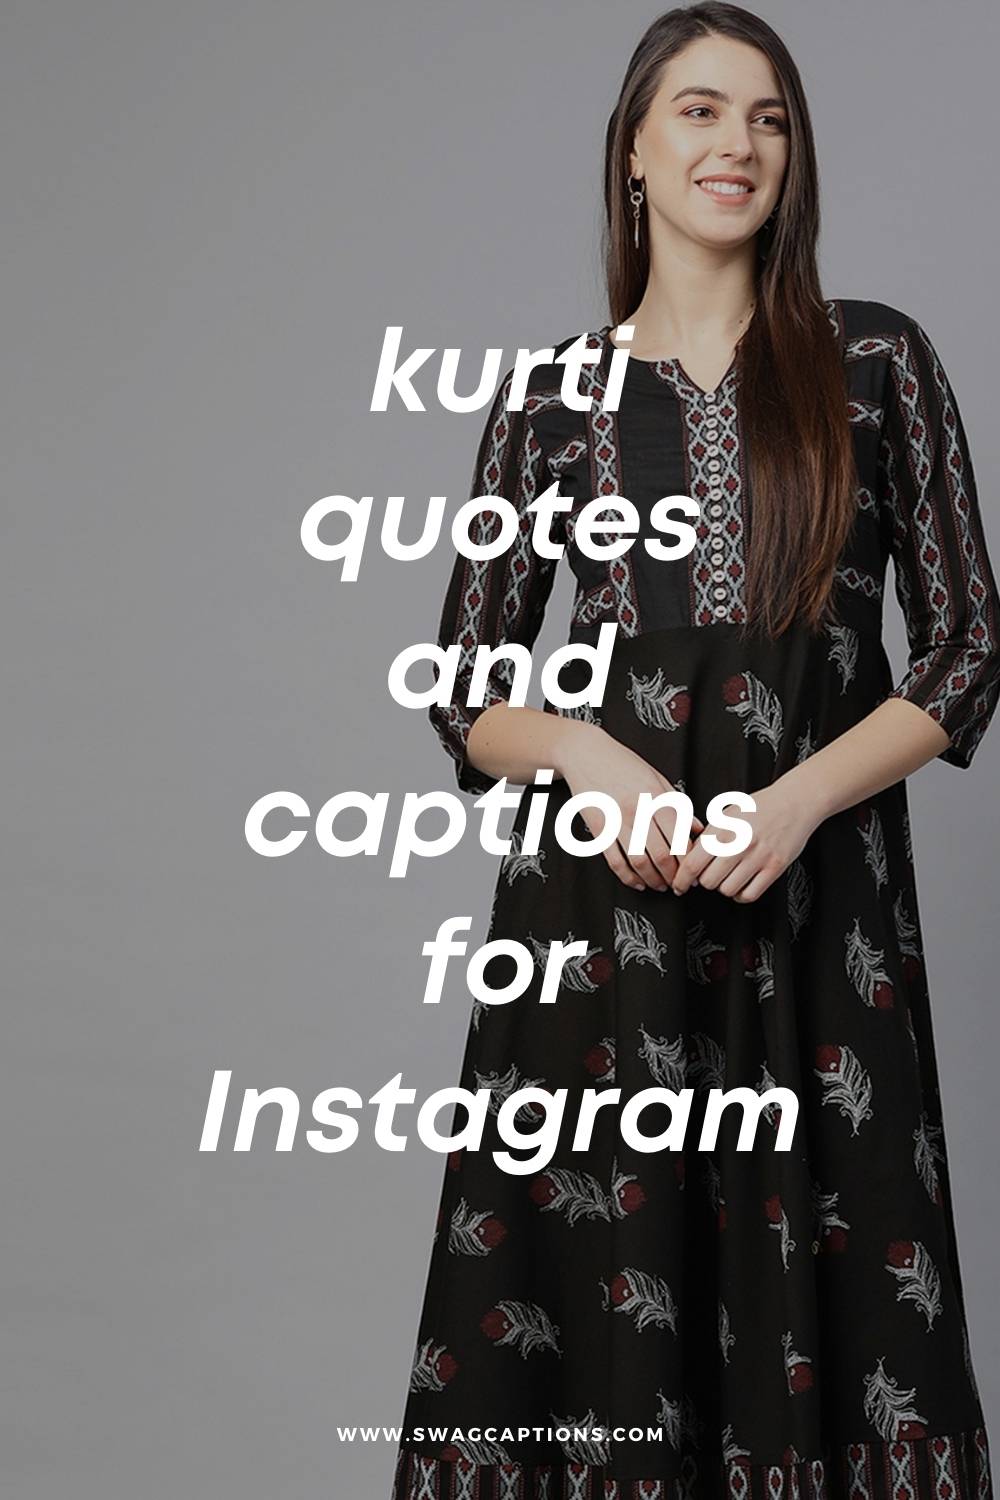 kurti captions and quotes for Instagram